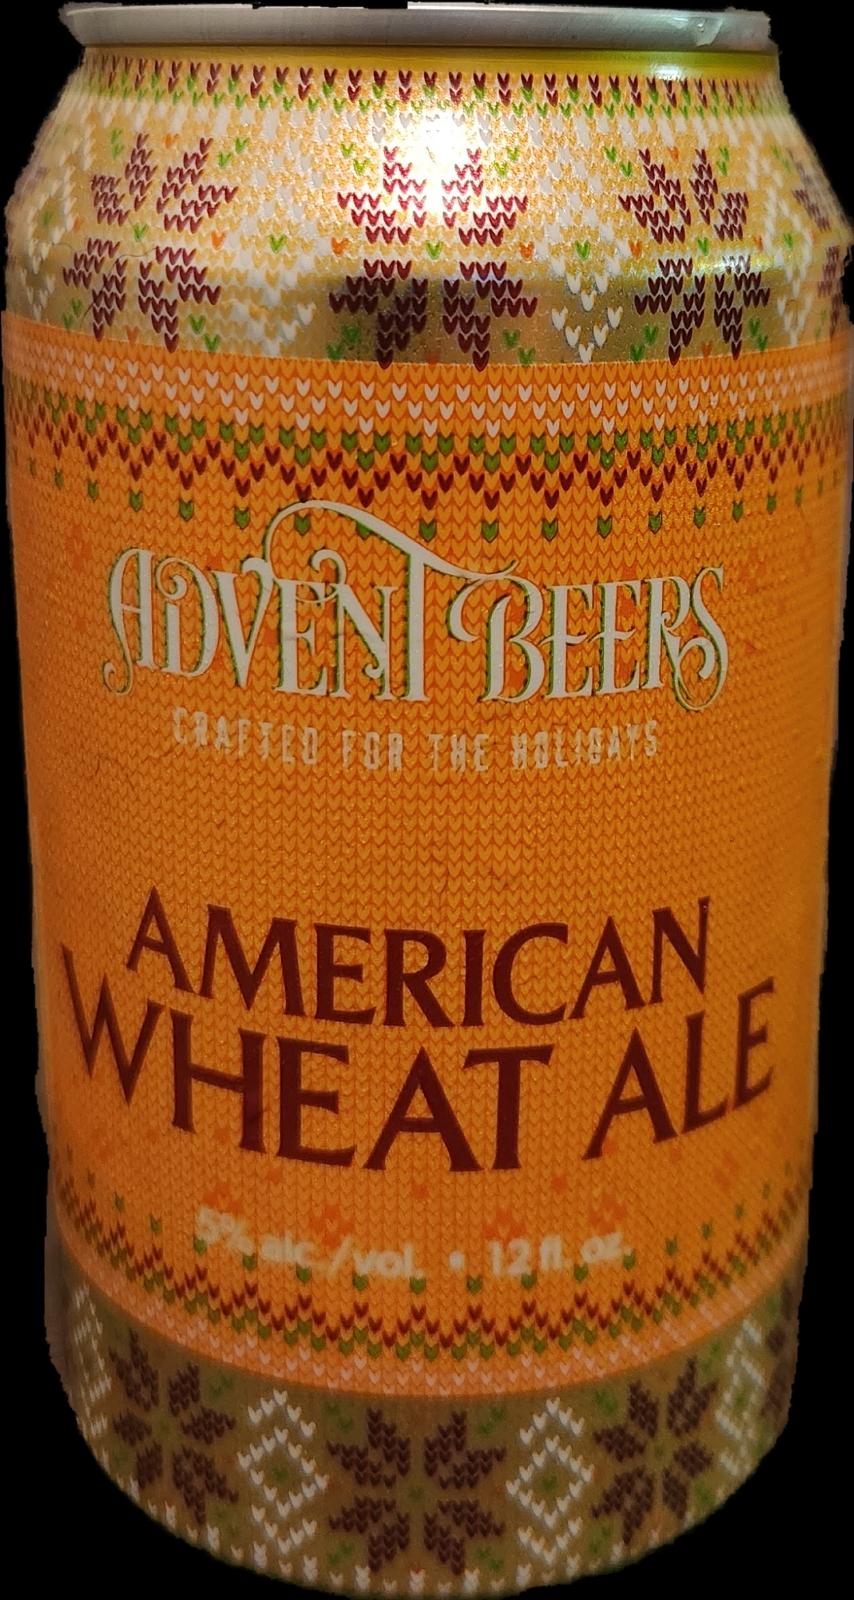 Advent Beers American Wheat Ale